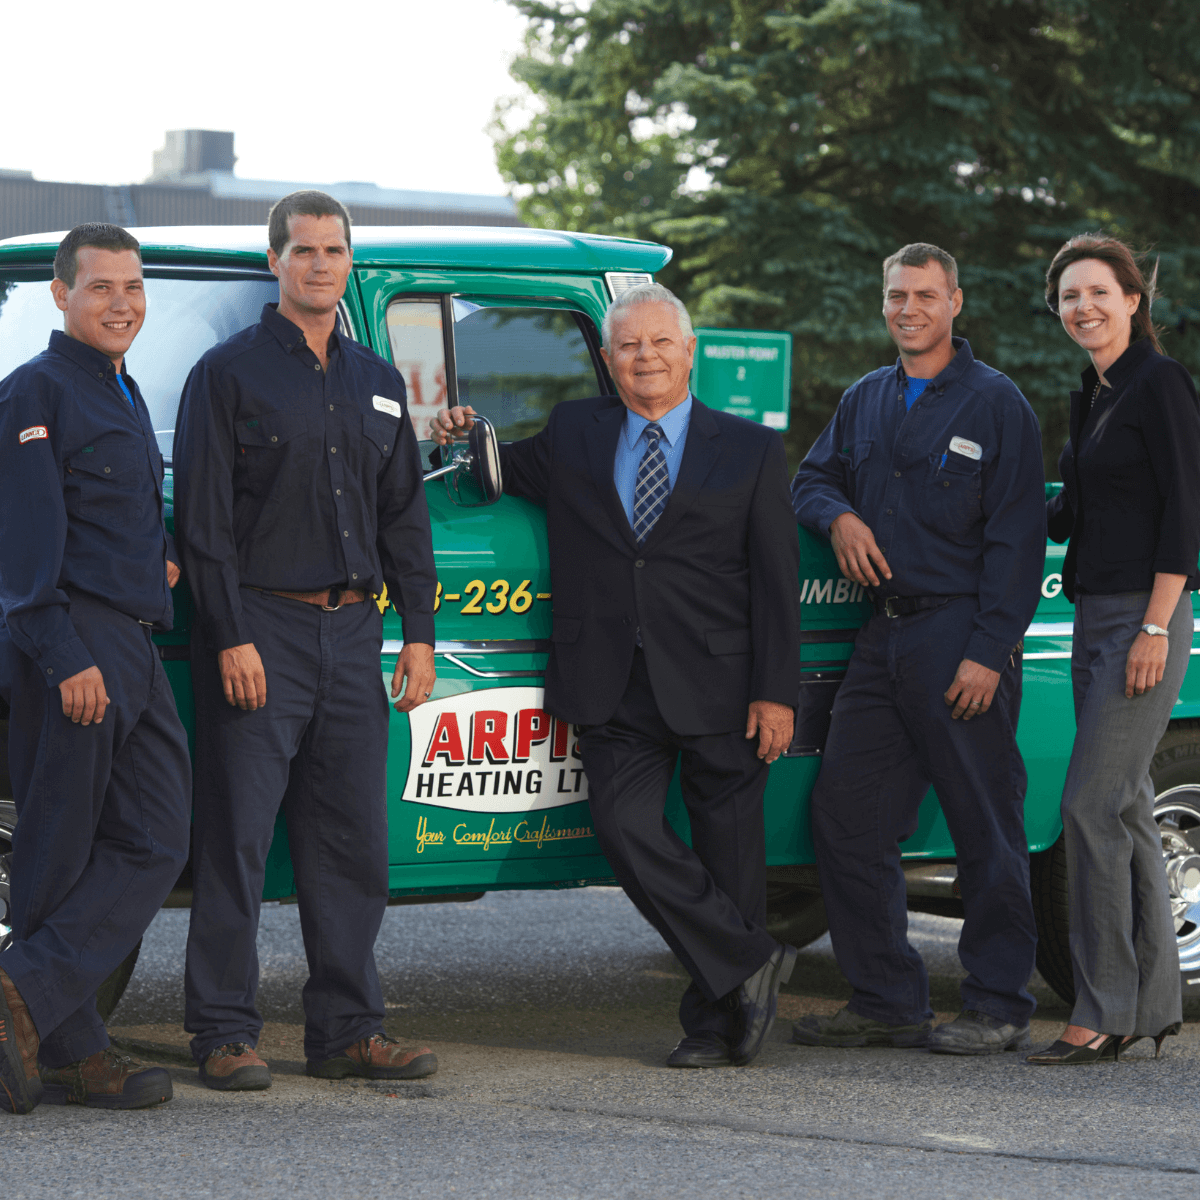 Arpi's experienced team of certified plumbers and HVAC technicians